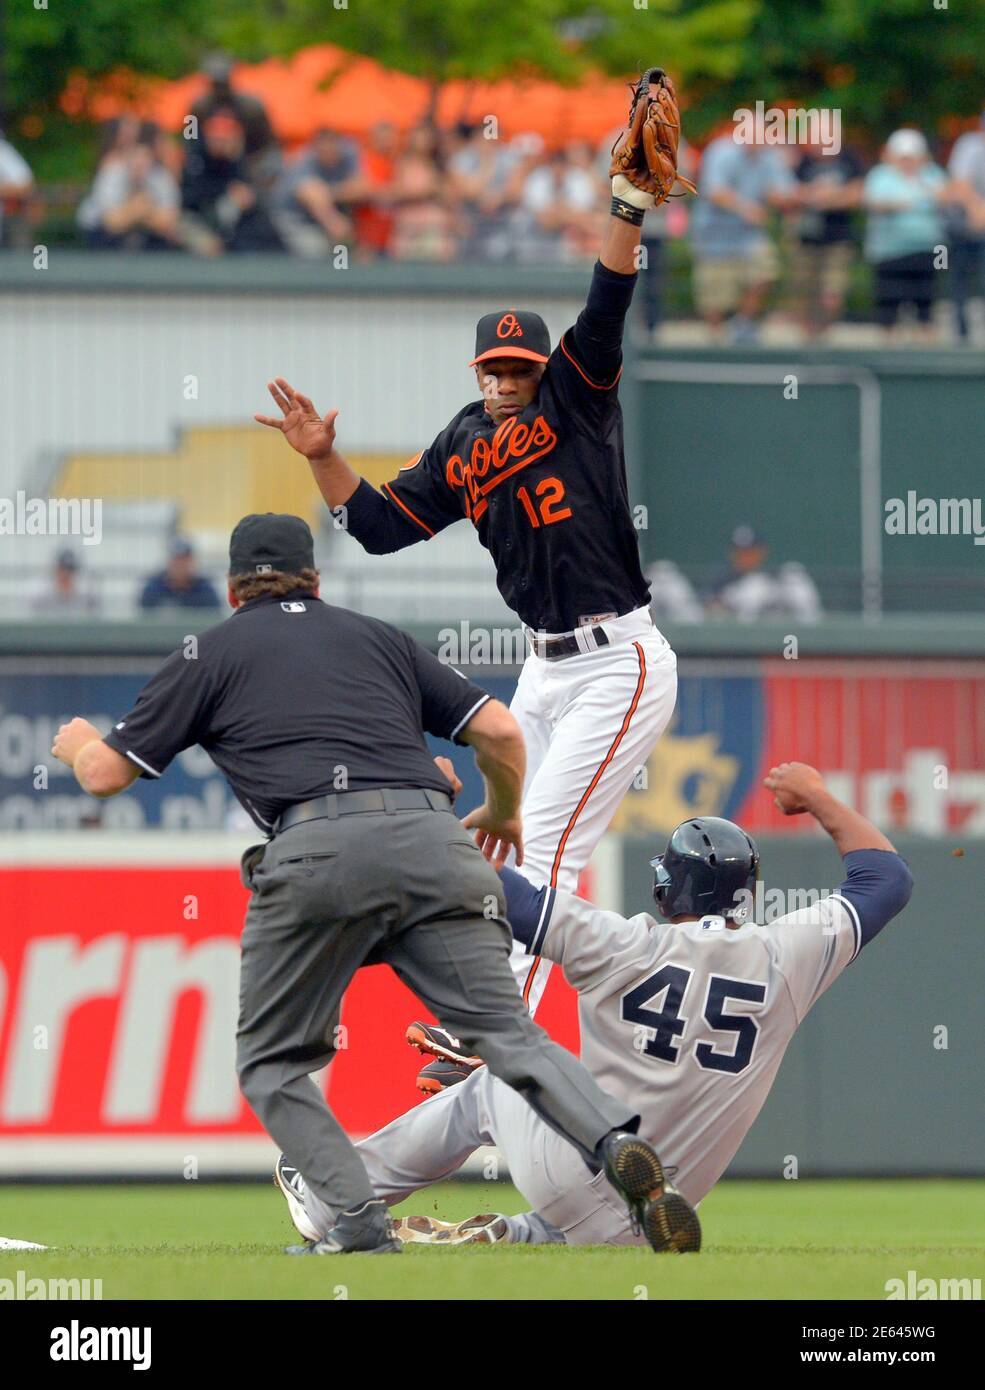 Baltimore Orioles second baseman Alexi Casilla leaps for the throw but can't get the tag down in time to catch New York Yankees baserunner Zoilo Almonte on a stolen base during the second inning of their MLB American League baseball game in Baltimore, Maryland June 28, 2013.  REUTERS/Doug Kapustin (UNITED STATES - Tags: SPORT BASEBALL) Stock Photo